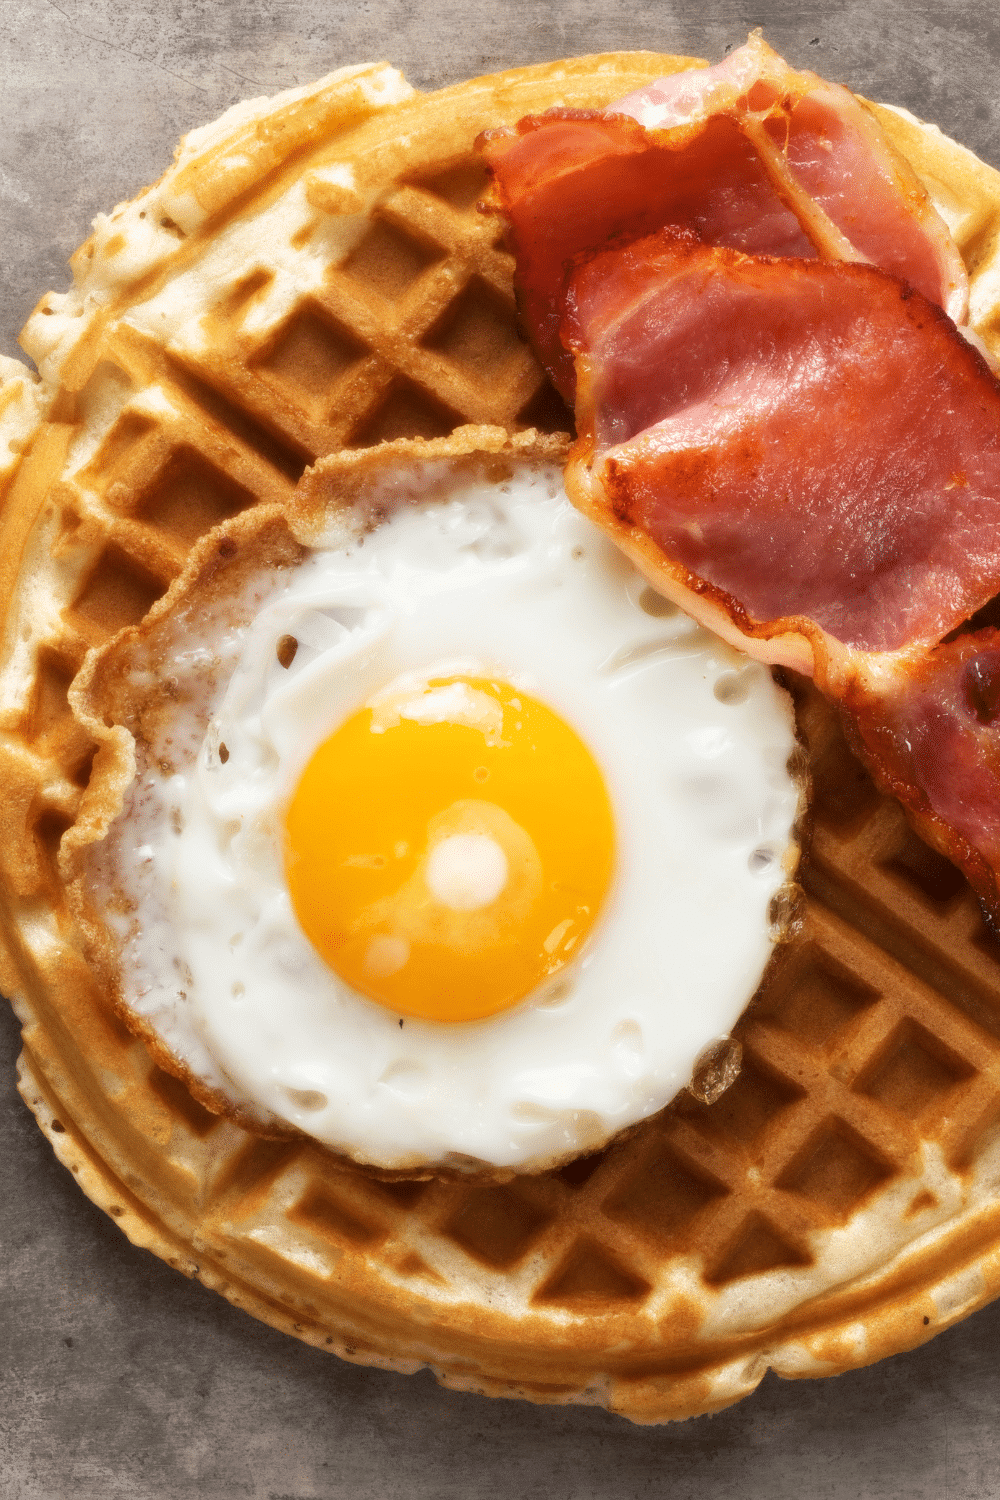 21 Chaffle Recipes That Will Change Your Life Forever - Olivia